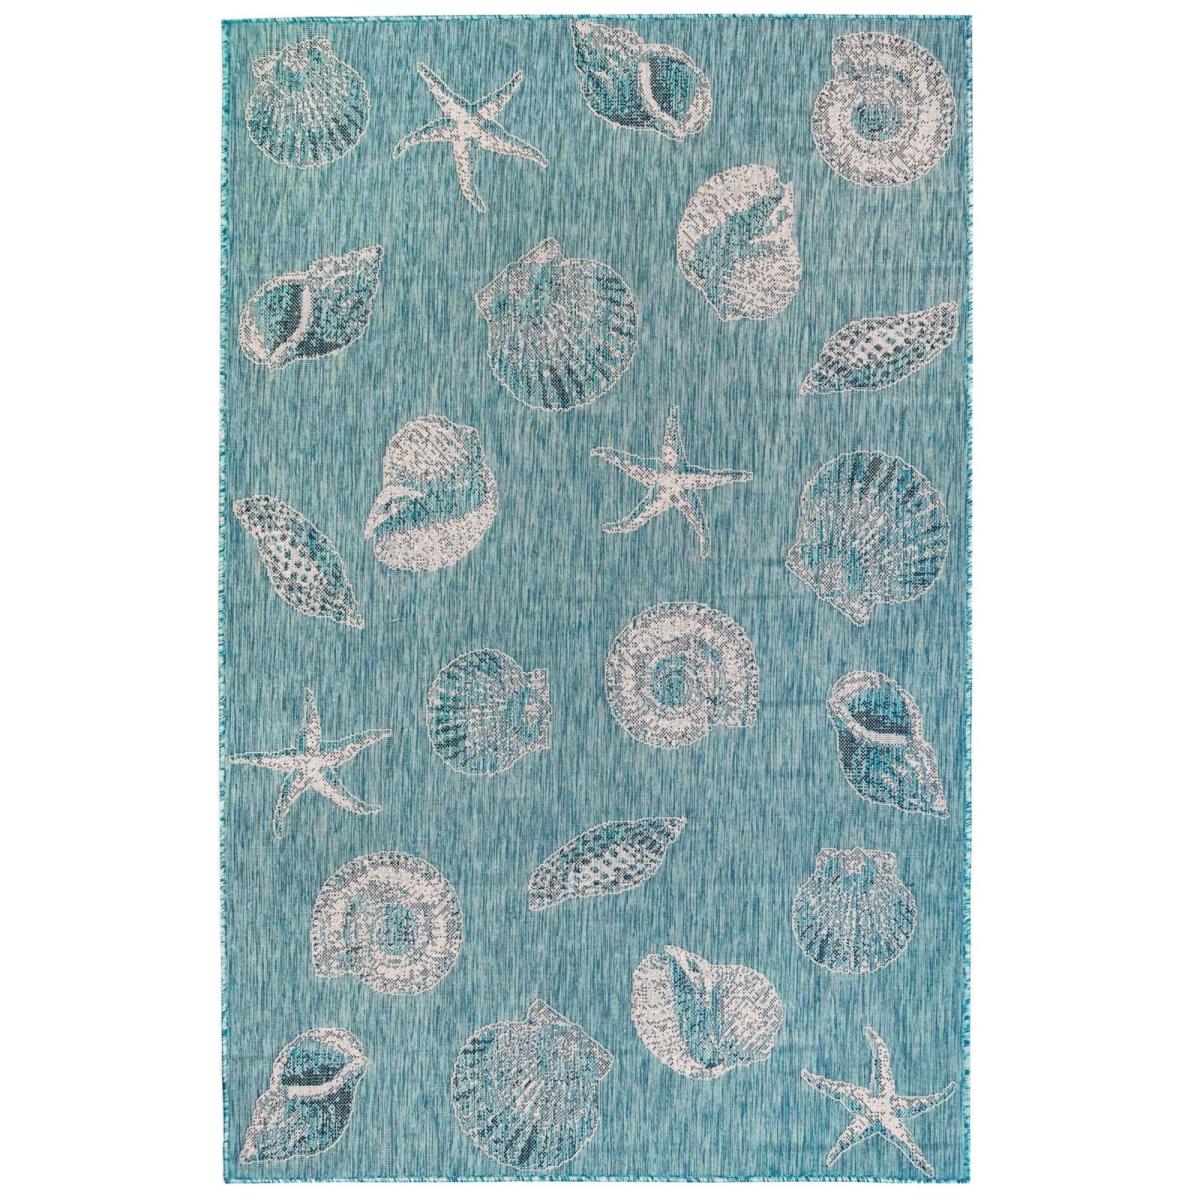 Trans-ocean Imports Cred8841404 7 Ft. 10 In. Round Liora Manne Carmel Shells Indoor & Outdoor Rug Wilton Woven Round Rug - Aqua